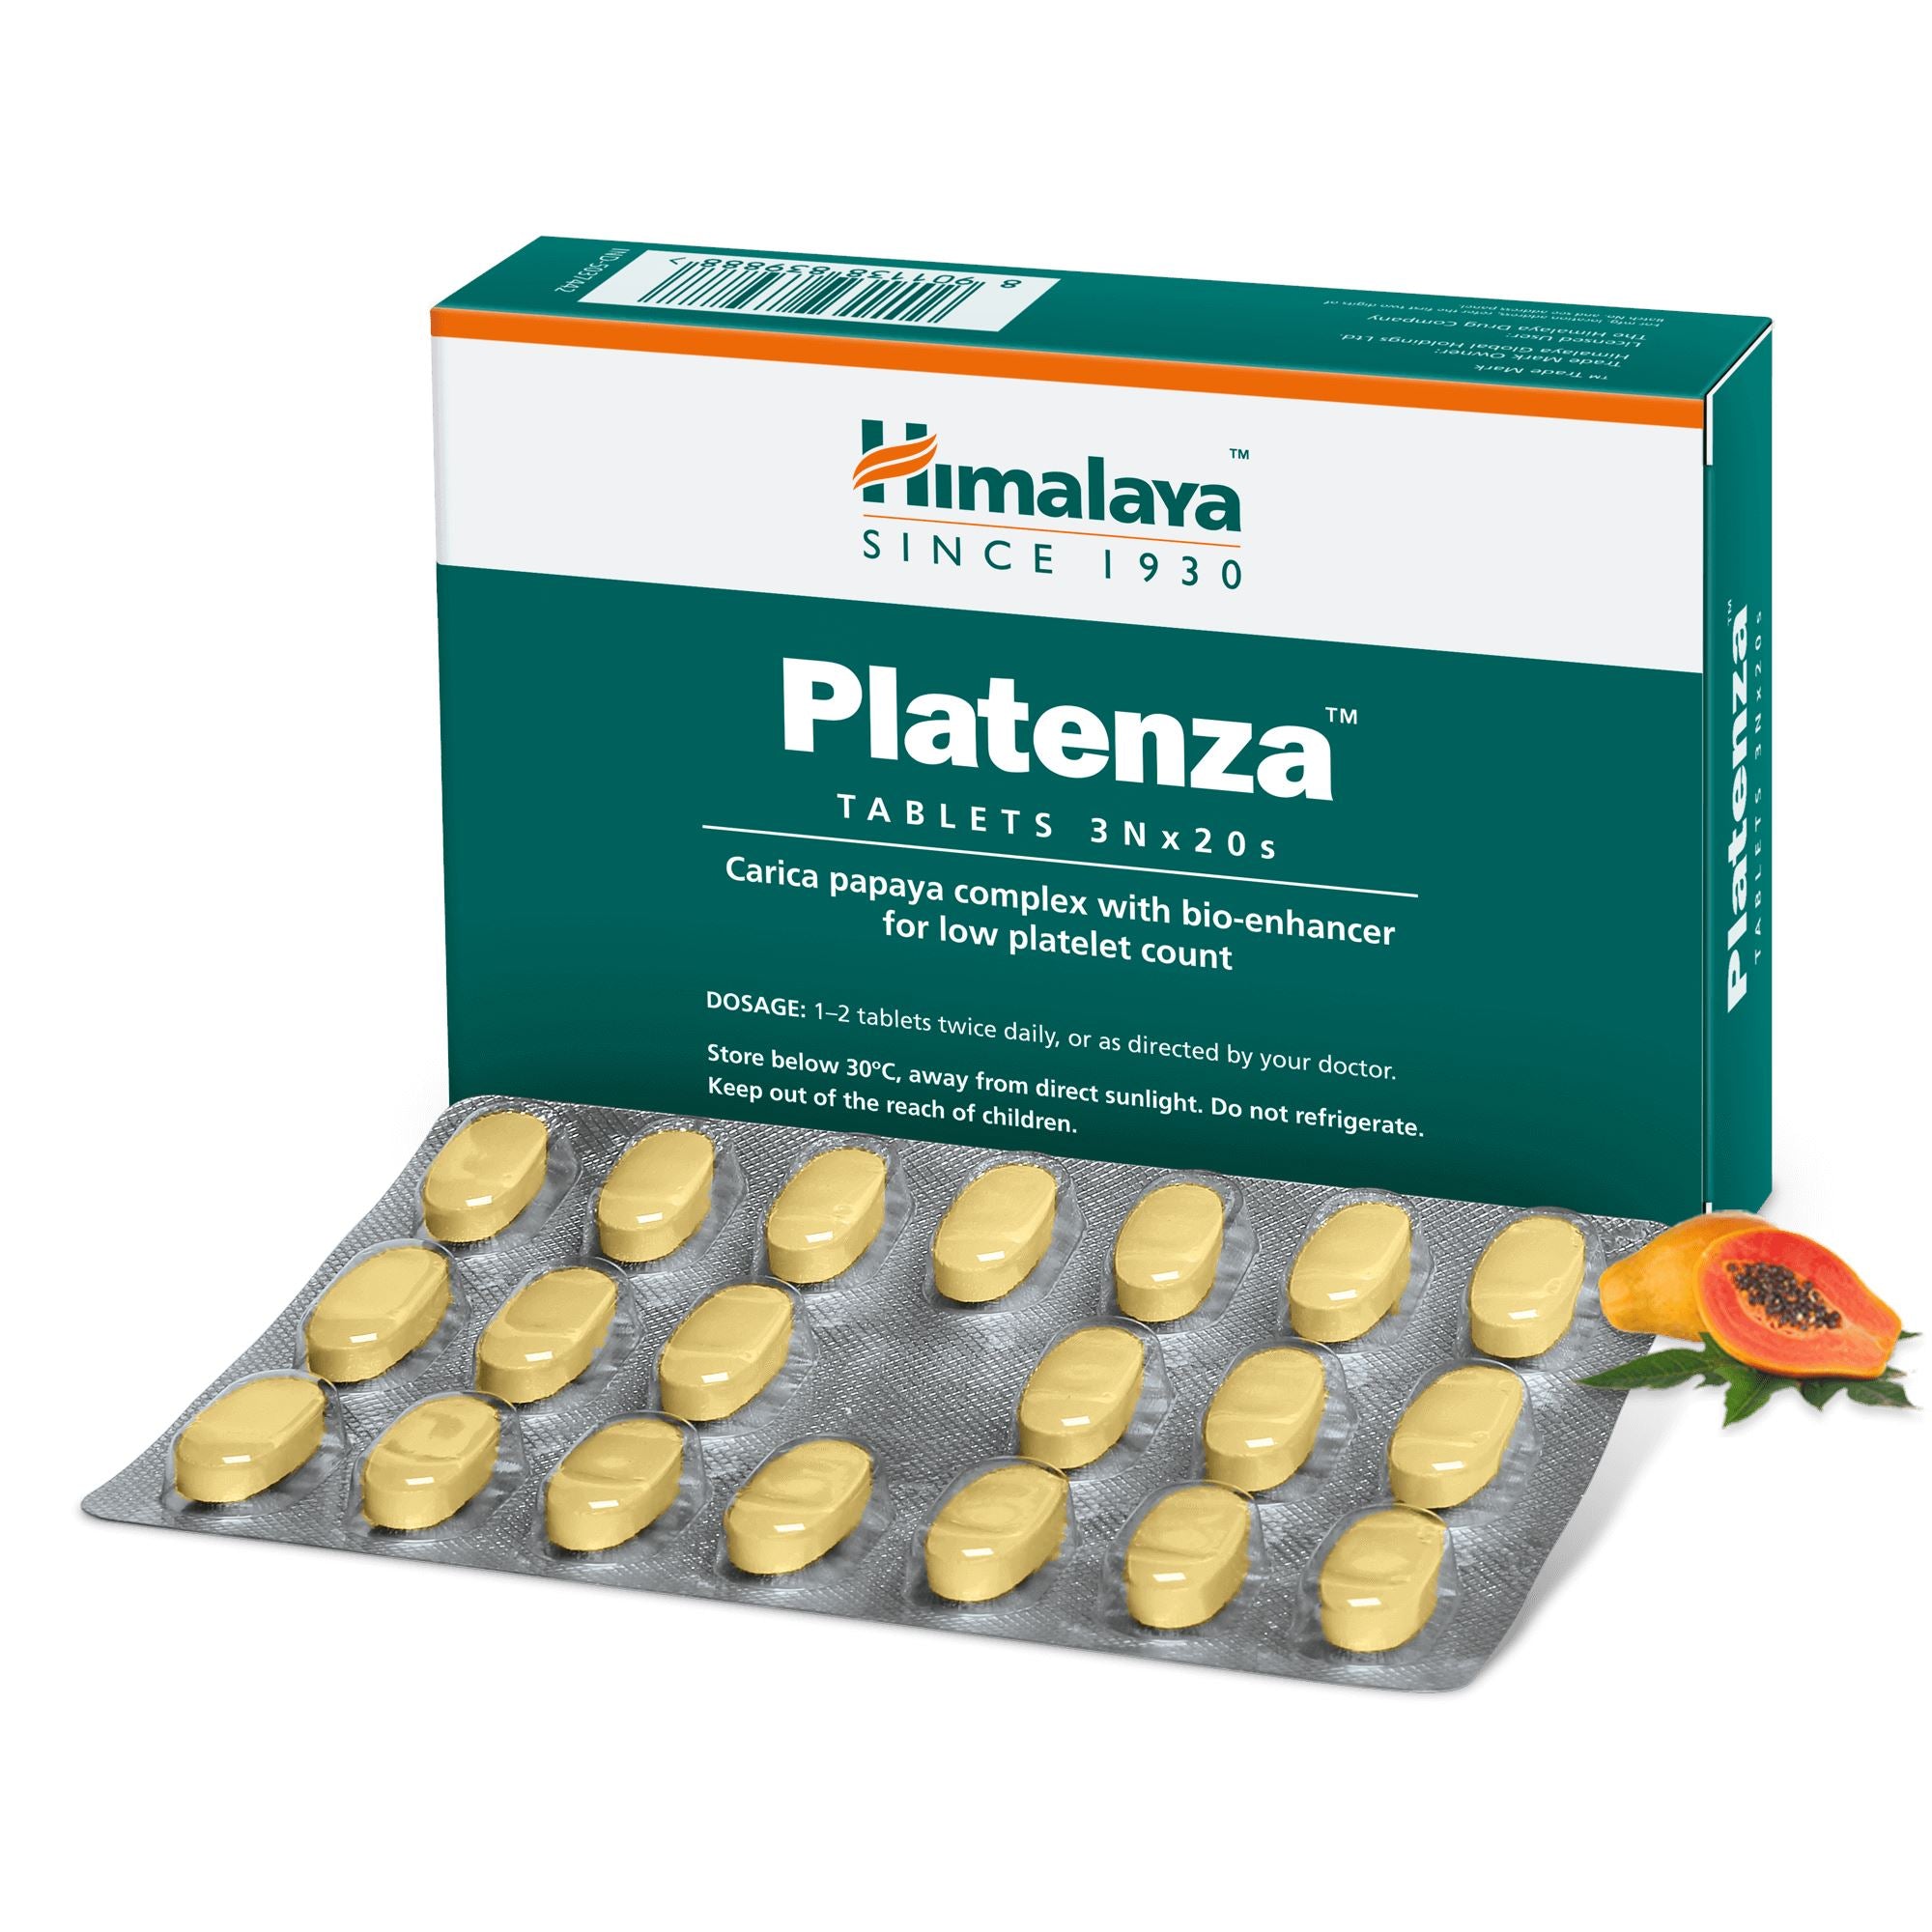 Himalaya Platenza - Tablets to increase platelet count